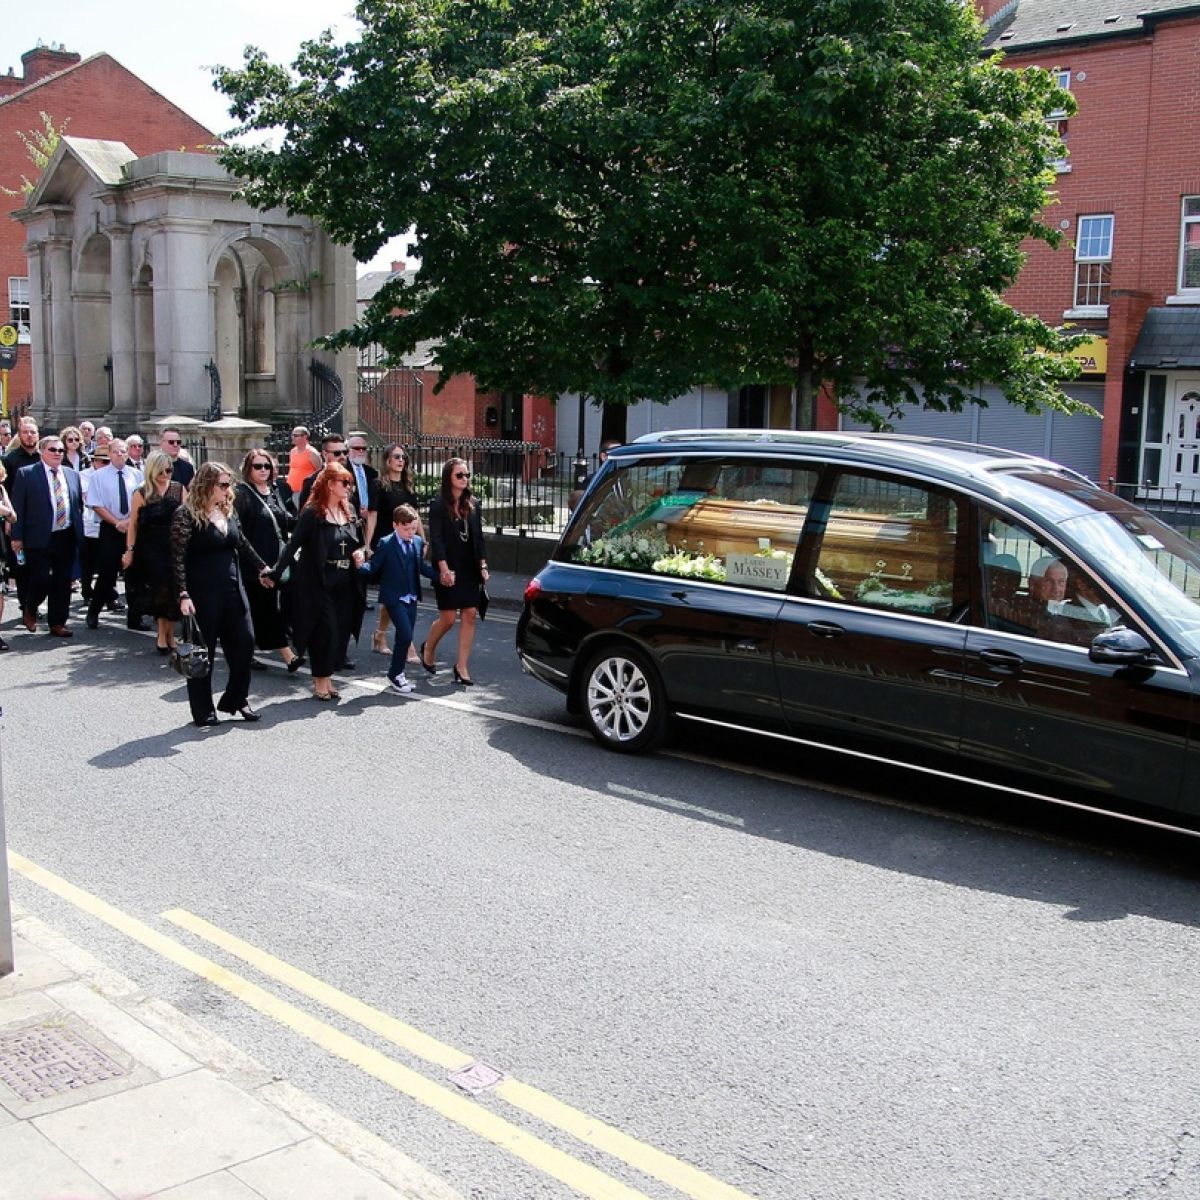 Brendan Grace Funeral Ceremony Blends Sadness And Raucous Laughter